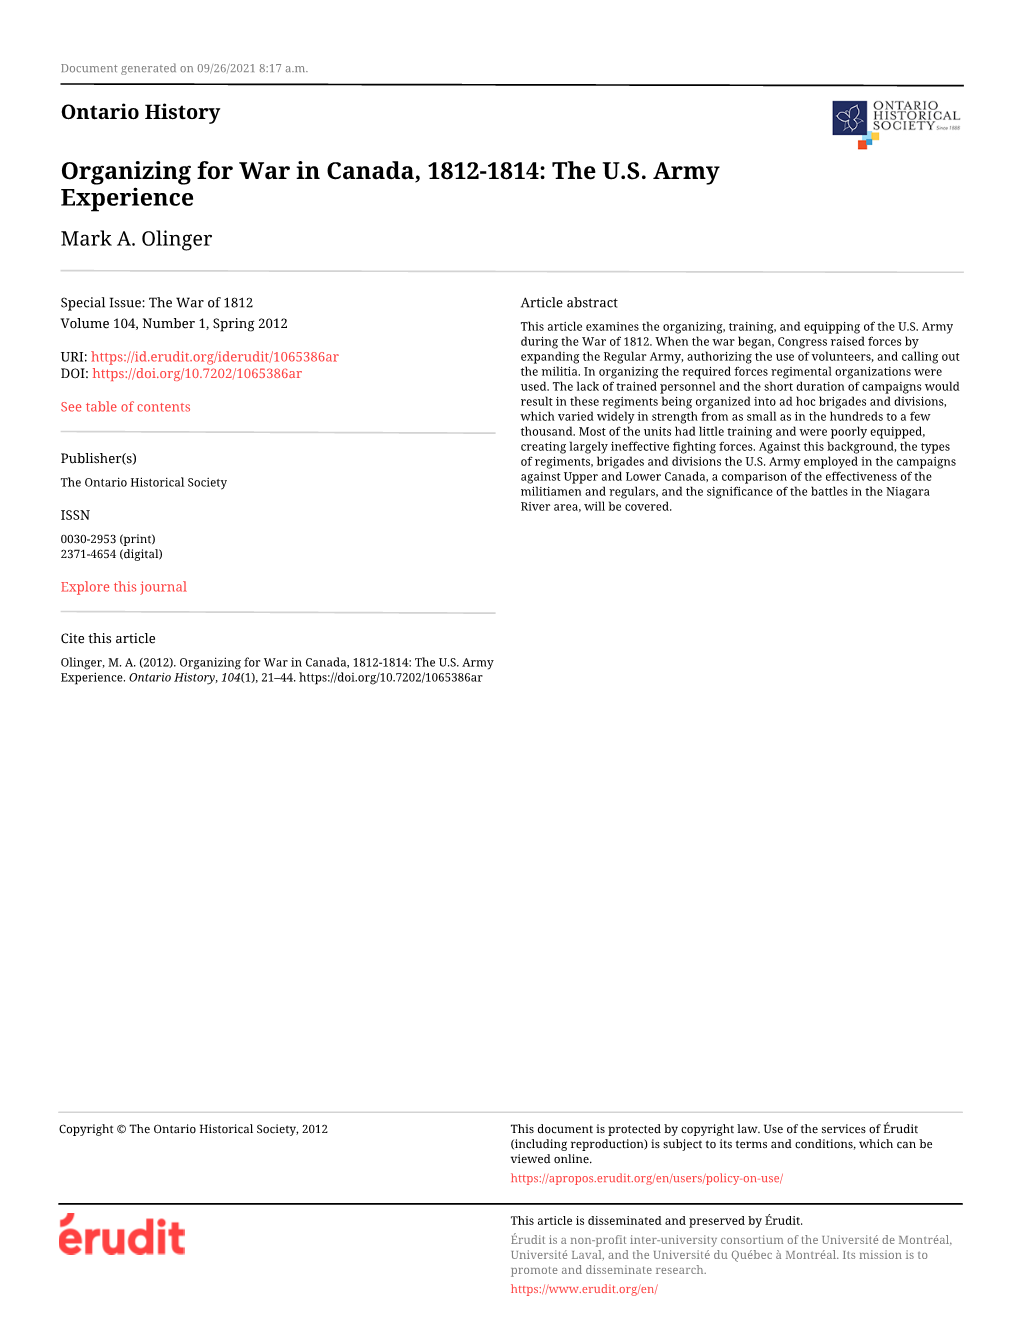 Organizing for War in Canada, 1812-1814: the U.S